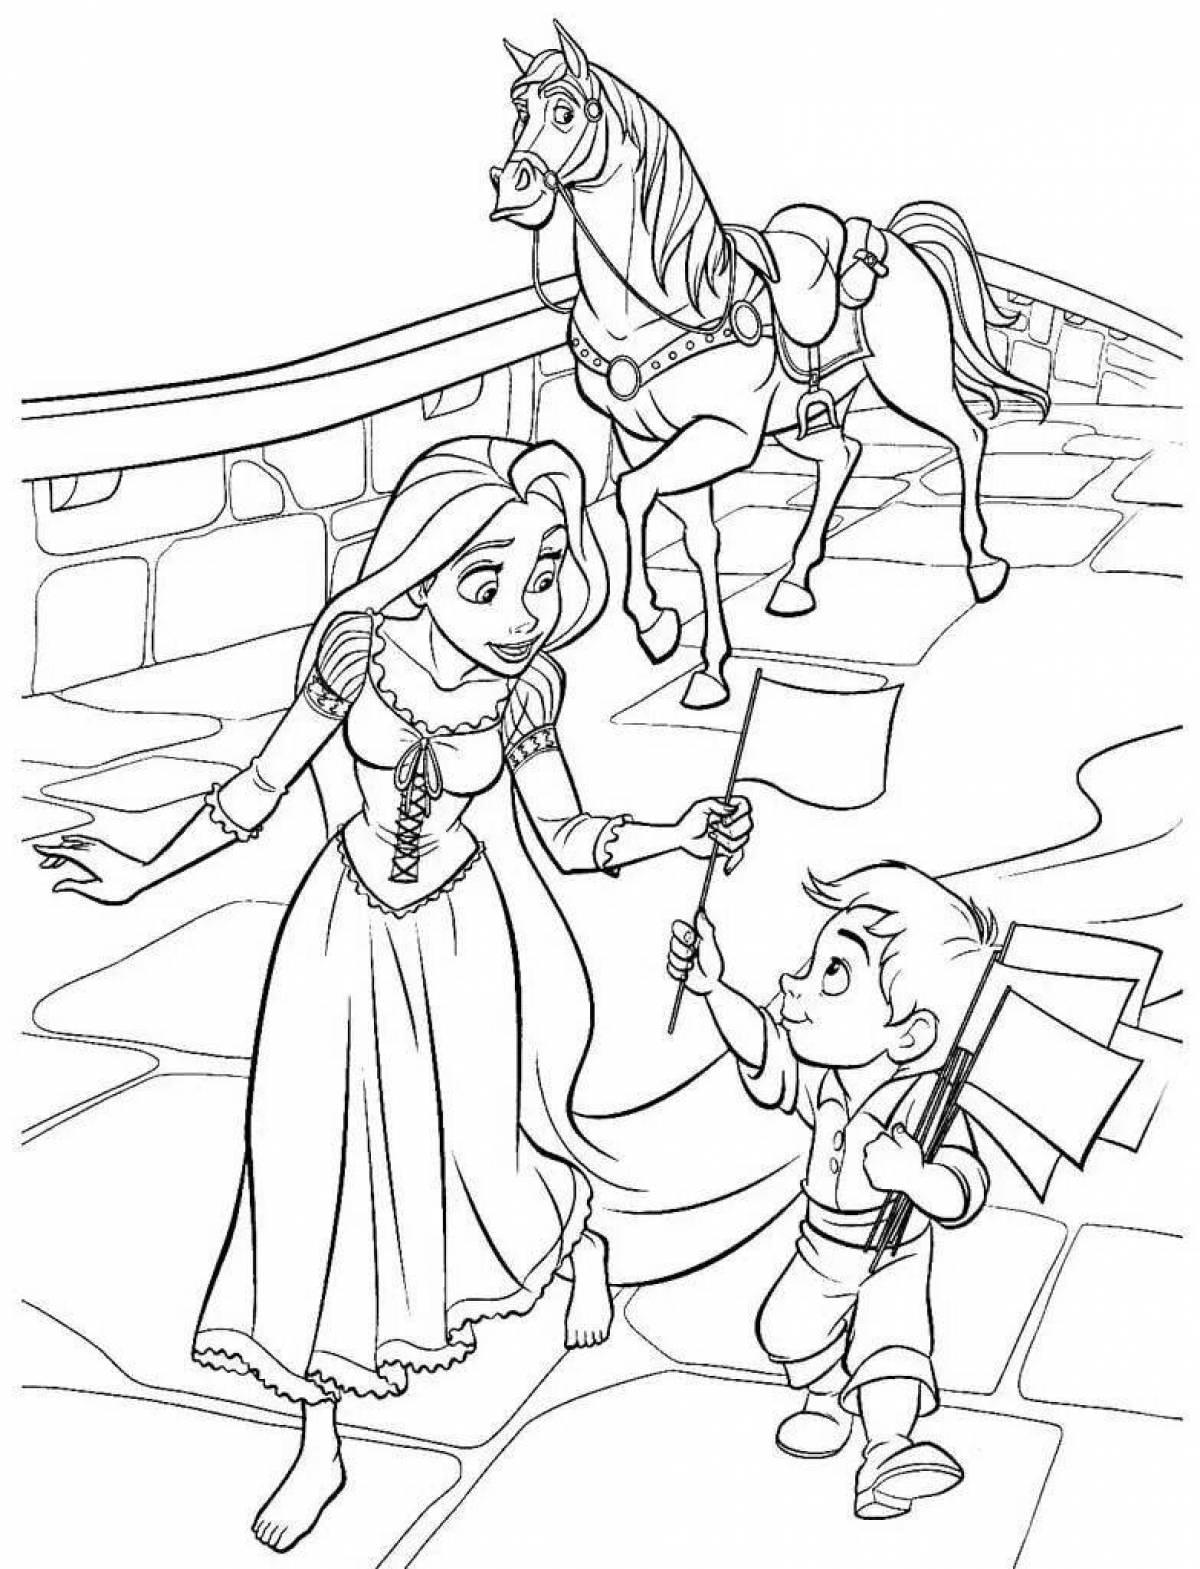 Tangled adorable coloring game